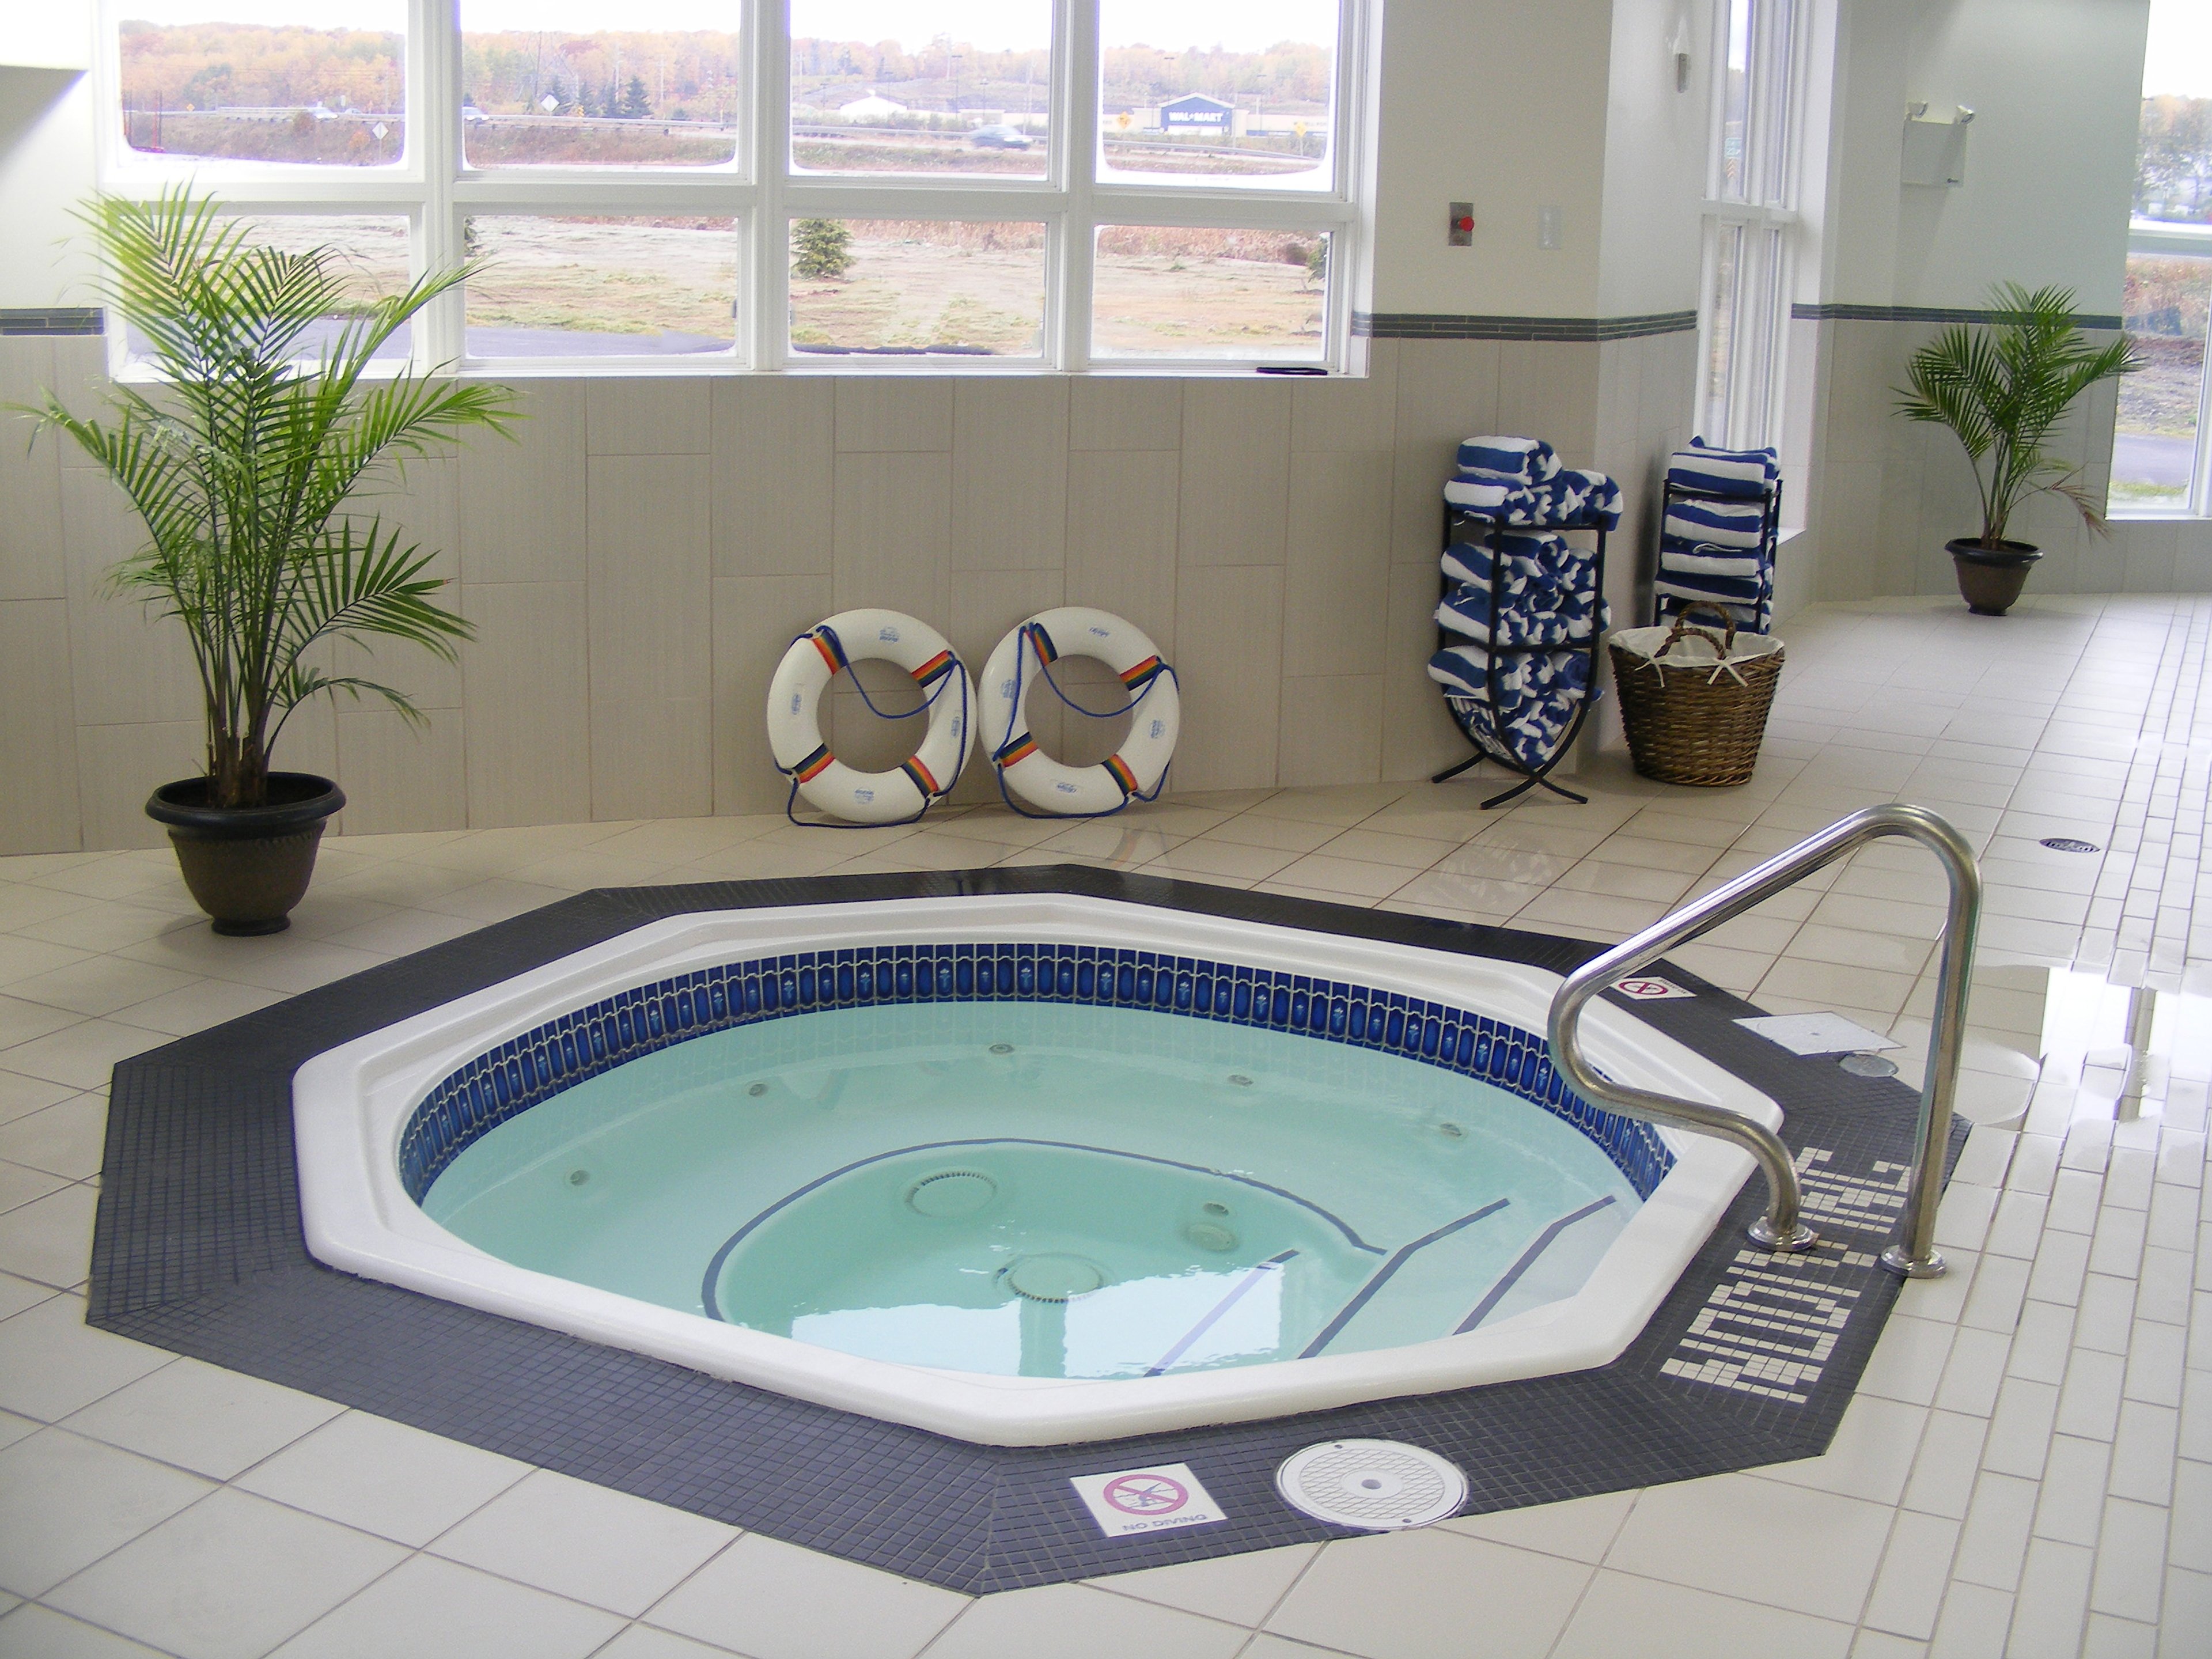 Relax and unwind in our hot tub